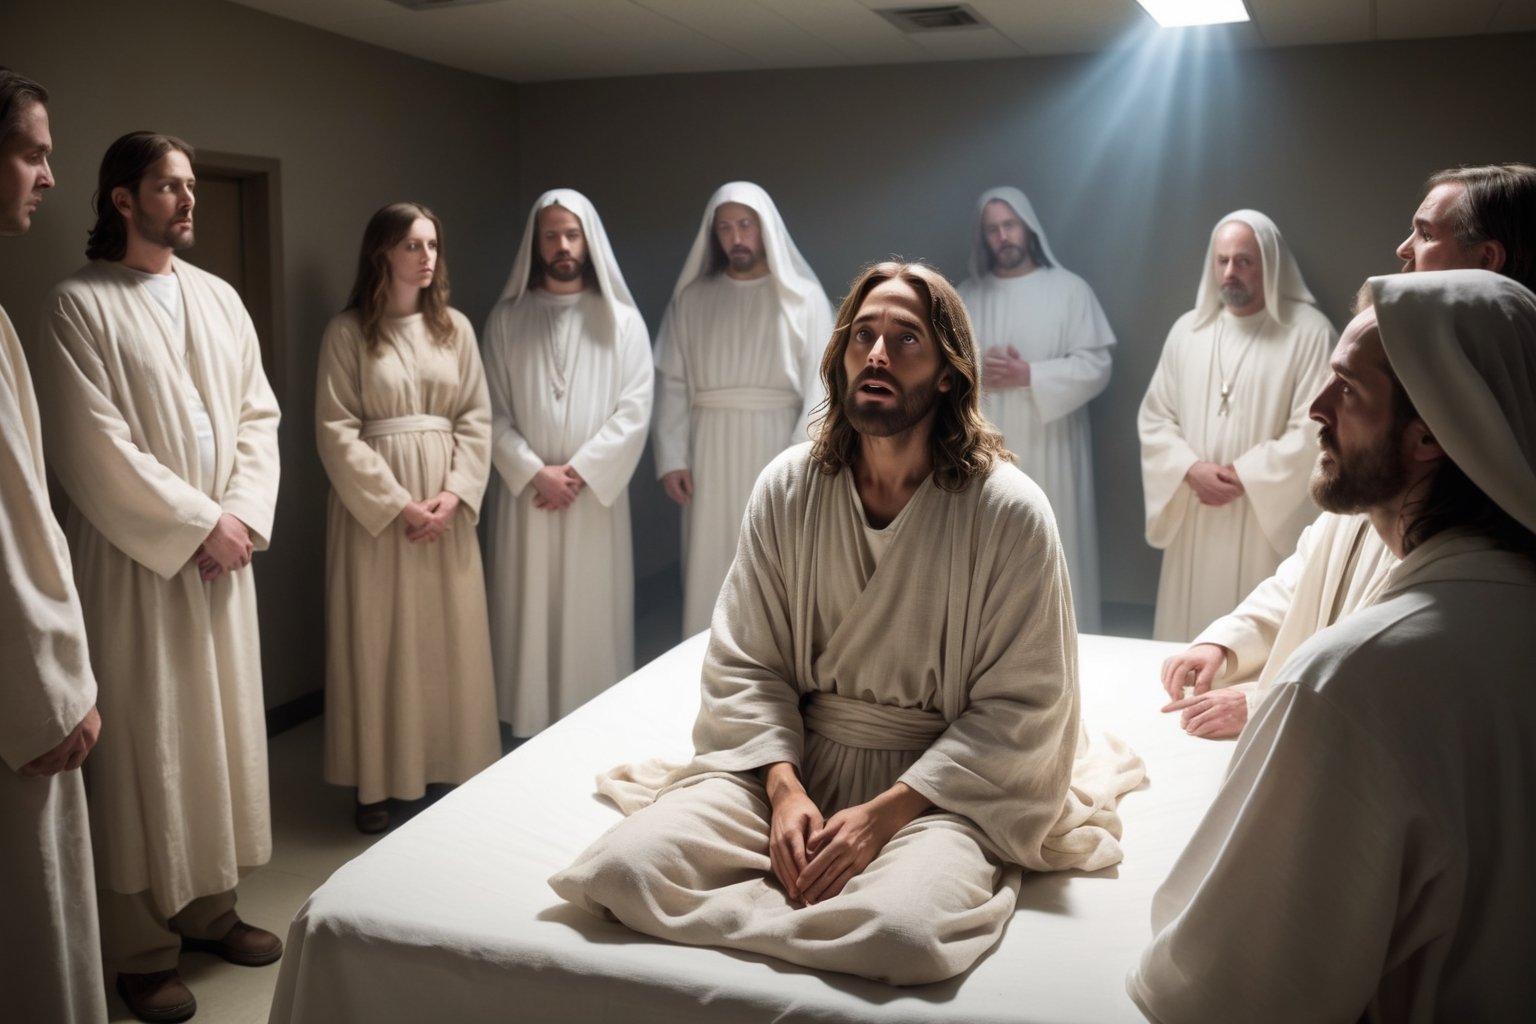 A dramatic scene of Jesus, wrapped in white linen, sitting up abruptly in a dimly lit mortuary. His eyes are wide with surprise as those around him, including clergy and medical personnel, stare in shock. There's an ethereal glow around Jesus and the room, adding to the sense of wonder and amazement. The atmosphere is tense, with a mixture of fear and awe radiating from the onlookers.